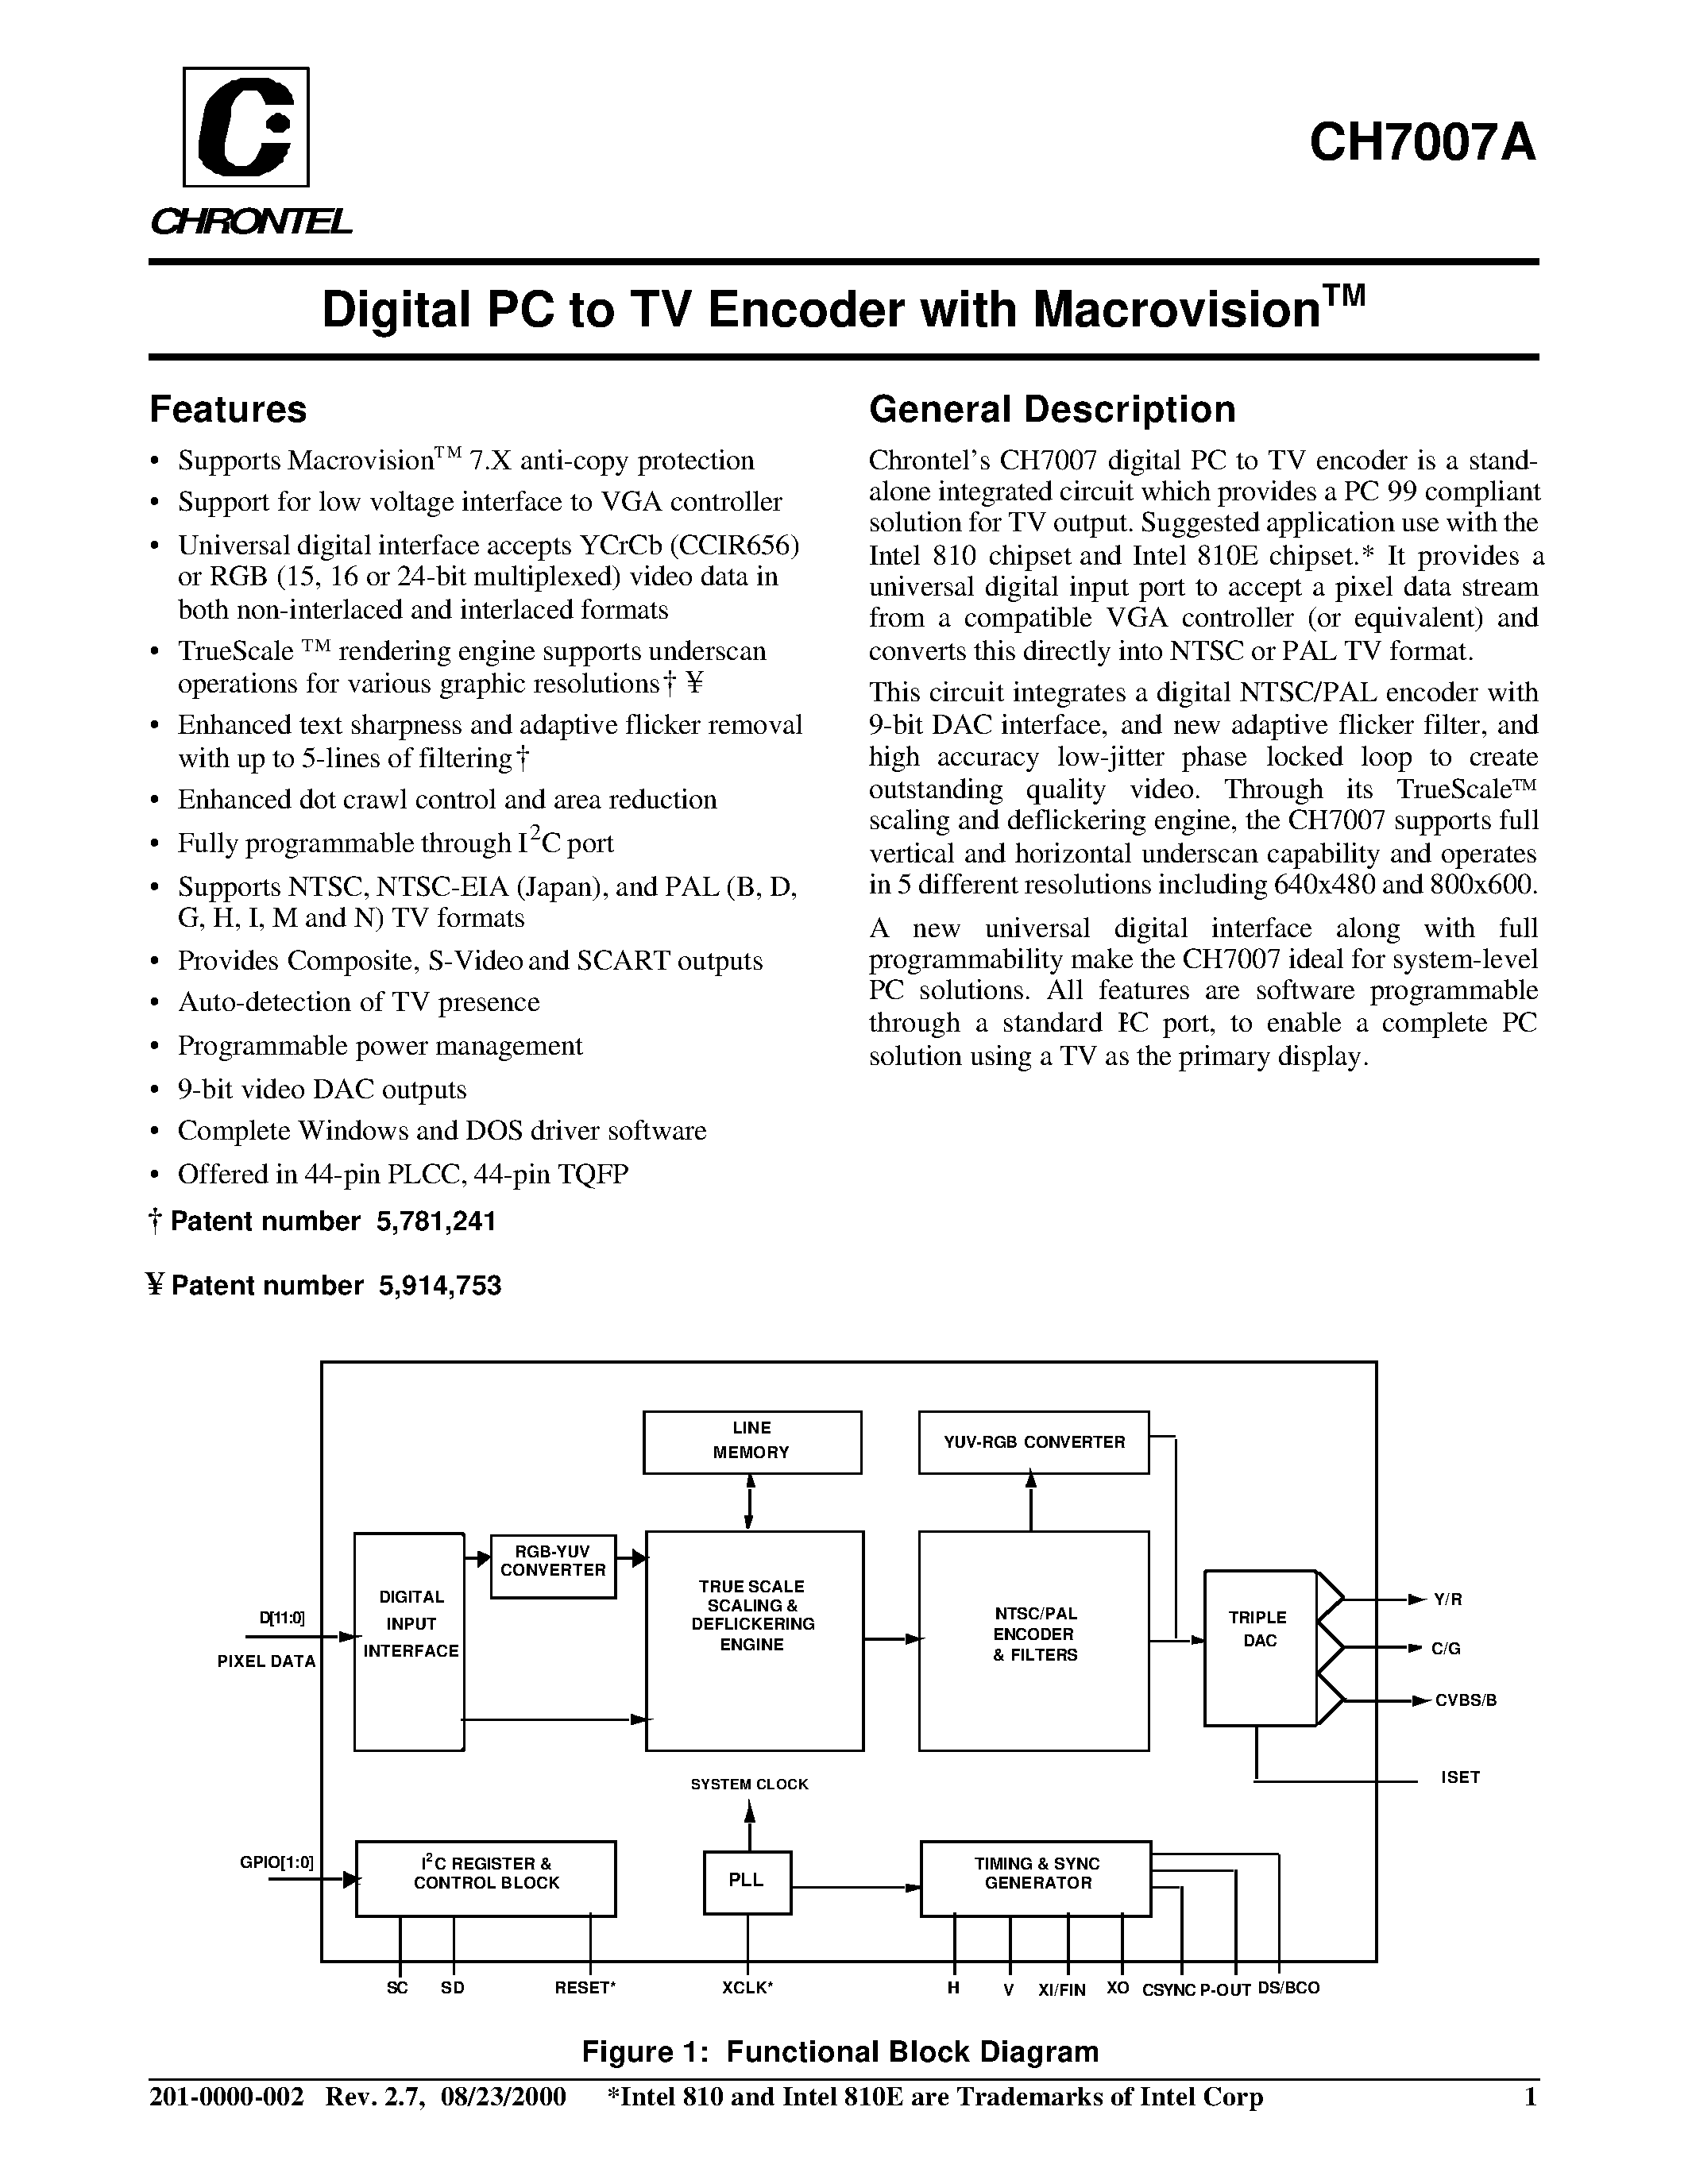 Даташит CH7007A-T-DIGITAL PC TO TV ENCODER WITH MACROVISION страница 1